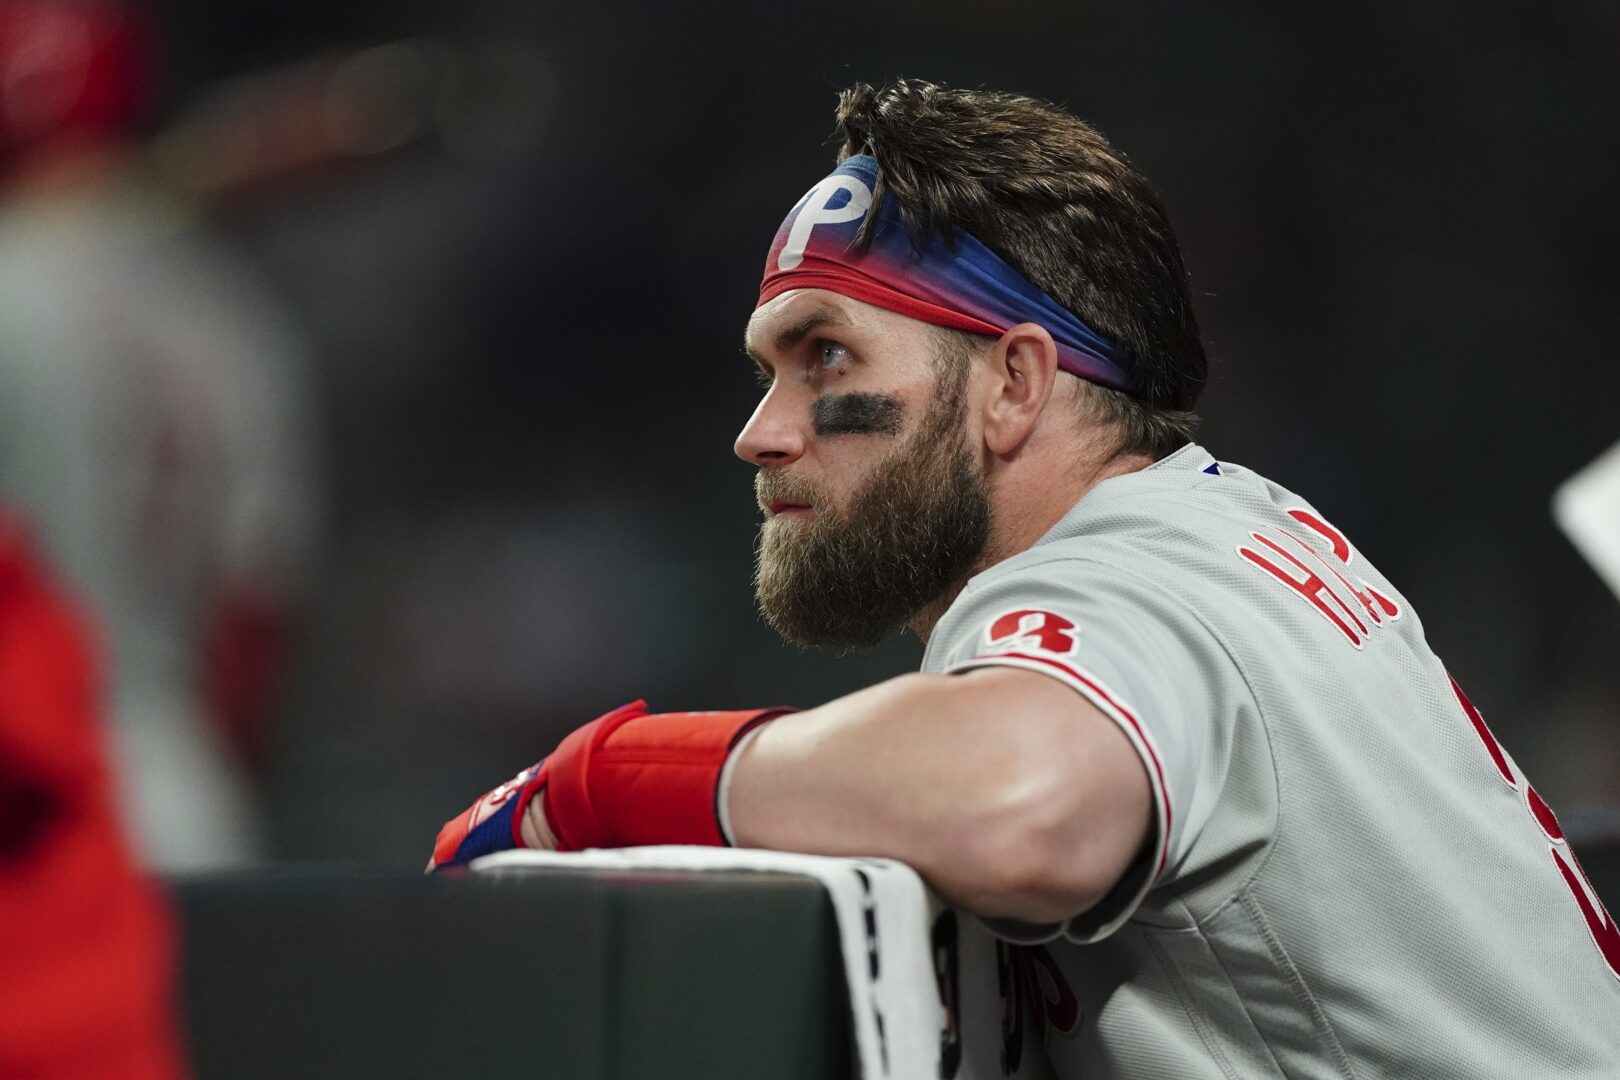 Philadelphia Phillies designated hitter Bryce Harper (3) watches play from the dugout during the seventh inning in Game 2 of baseball's National League Division Series between the Atlanta Braves and the Philadelphia Phillies, Wednesday, Oct. 12, 2022, in Atlanta. (